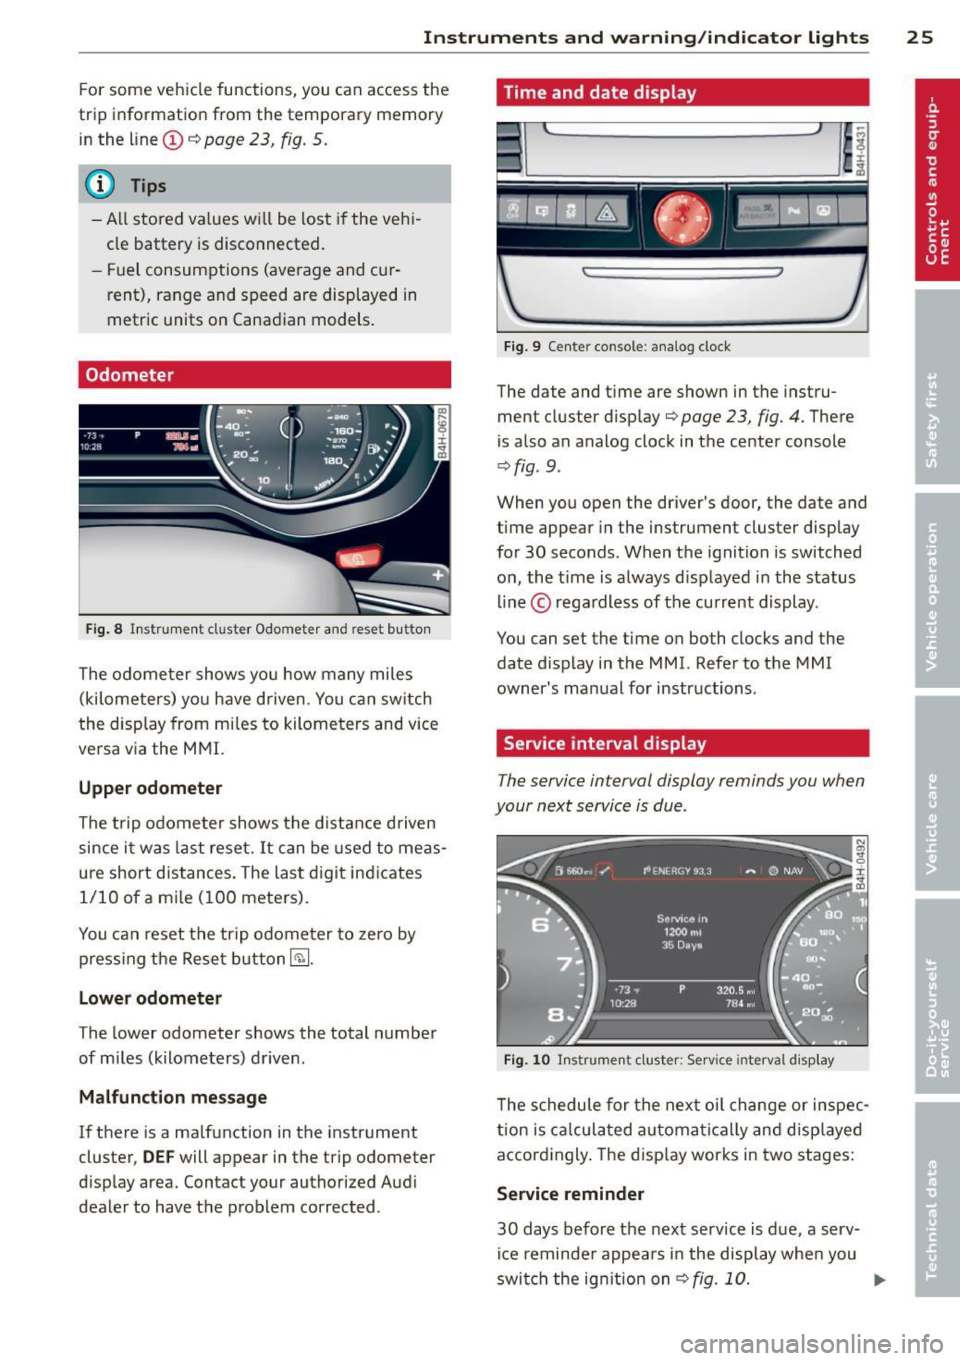 AUDI A8 2012  Owners Manual Instruments and warning/indicator  lights  25 
For some  vehicle  functions,  you  can  access  the 
trip  information  from  the  temporary  memory 
in the  line 
(I) c:;; page  23,  fig.  5. 
@ Tips